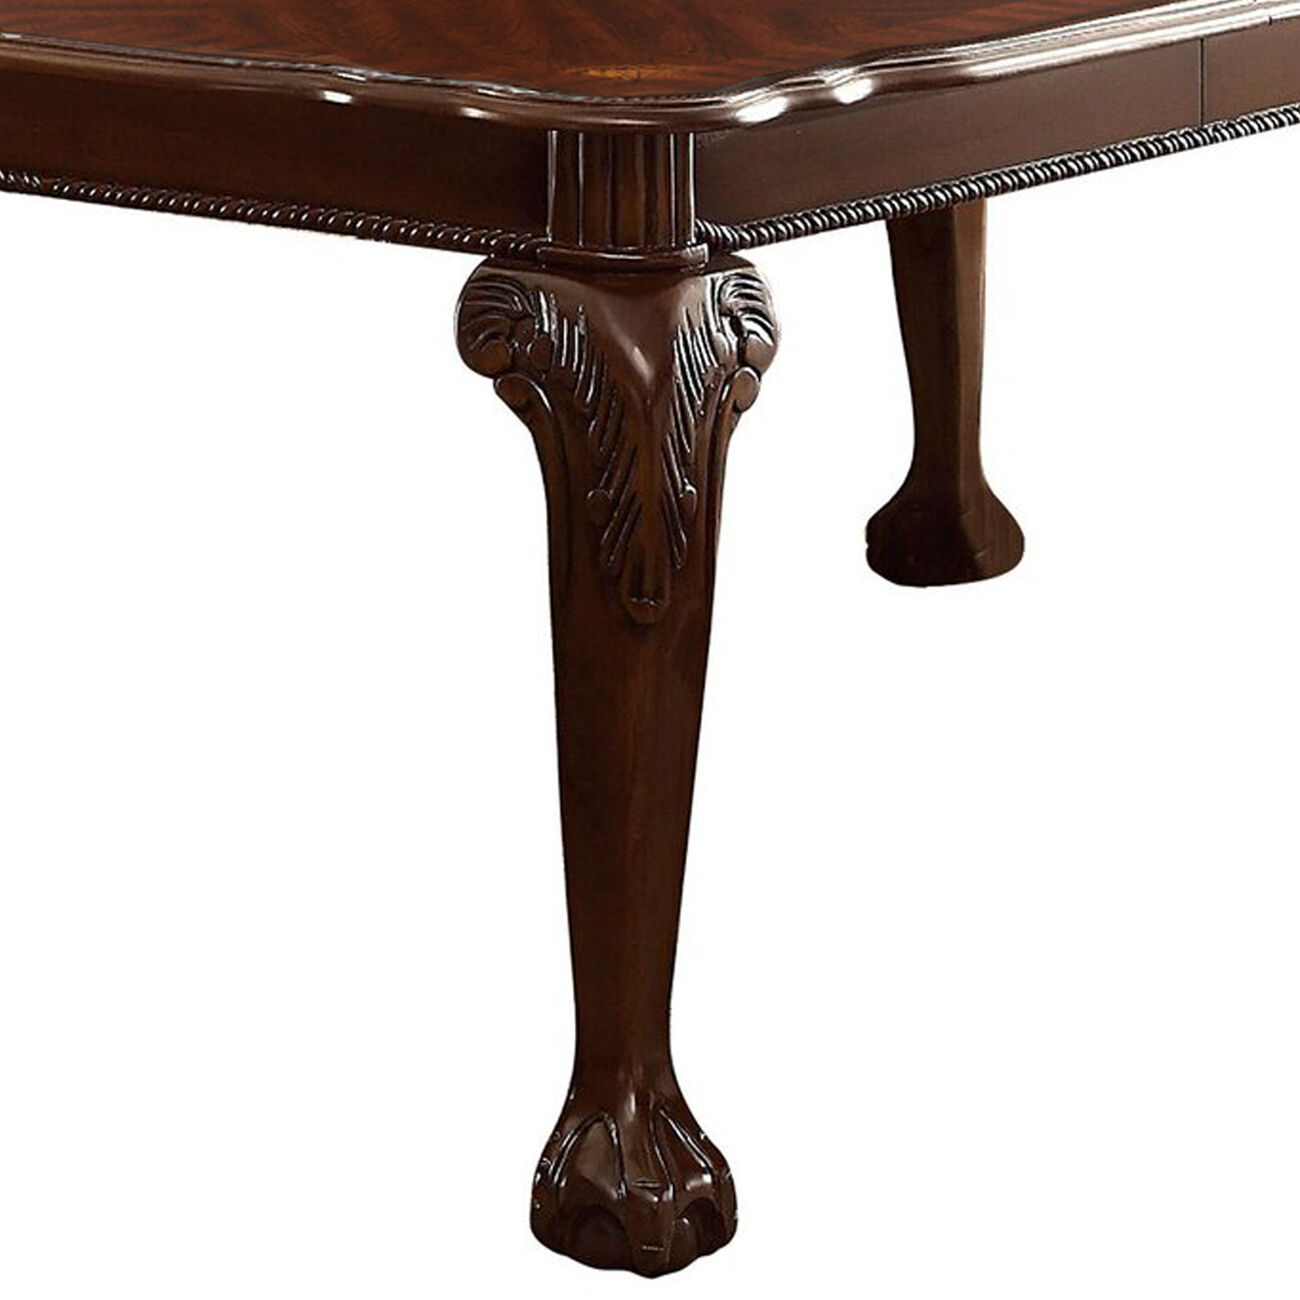 Wooden Extendable Leaf Dining Table with Cabriole Legs, Dark Brown